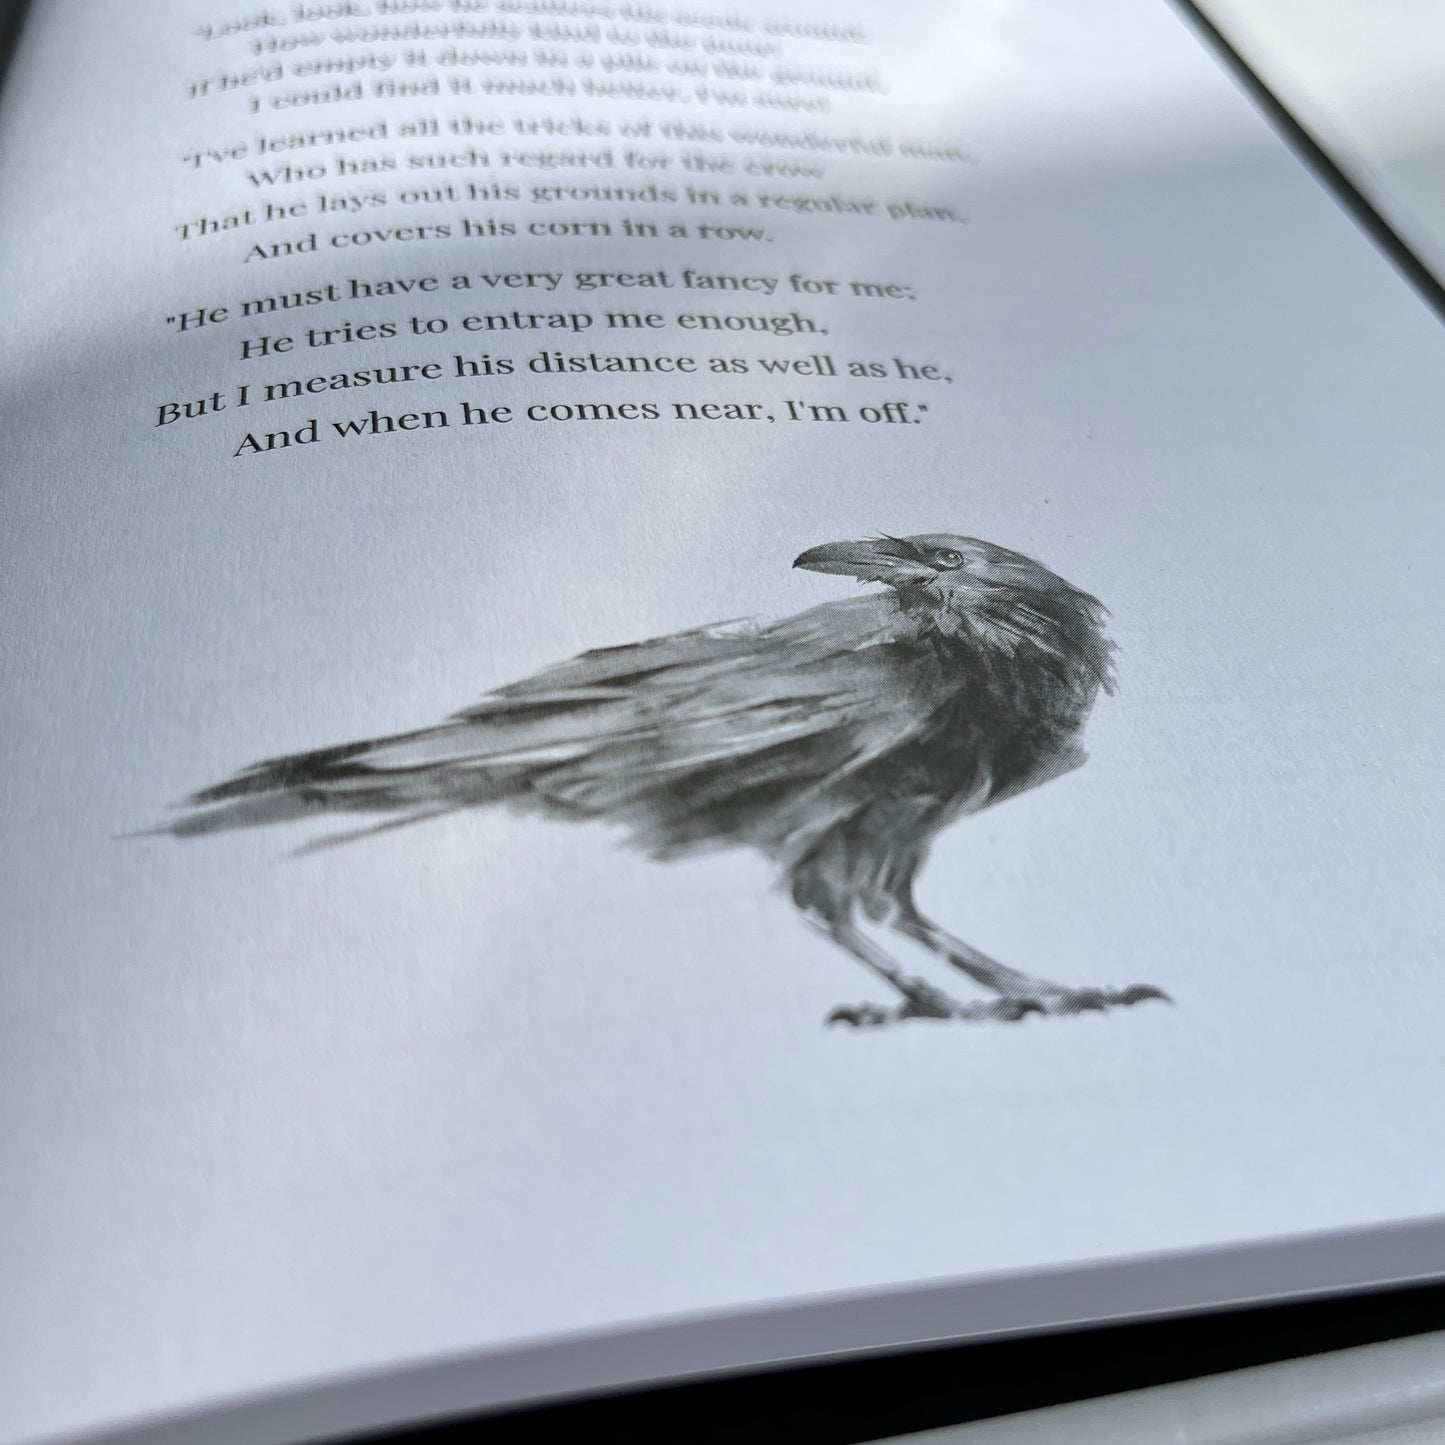 Be like a crow solo rpg adventure where you get to play a Corvid.